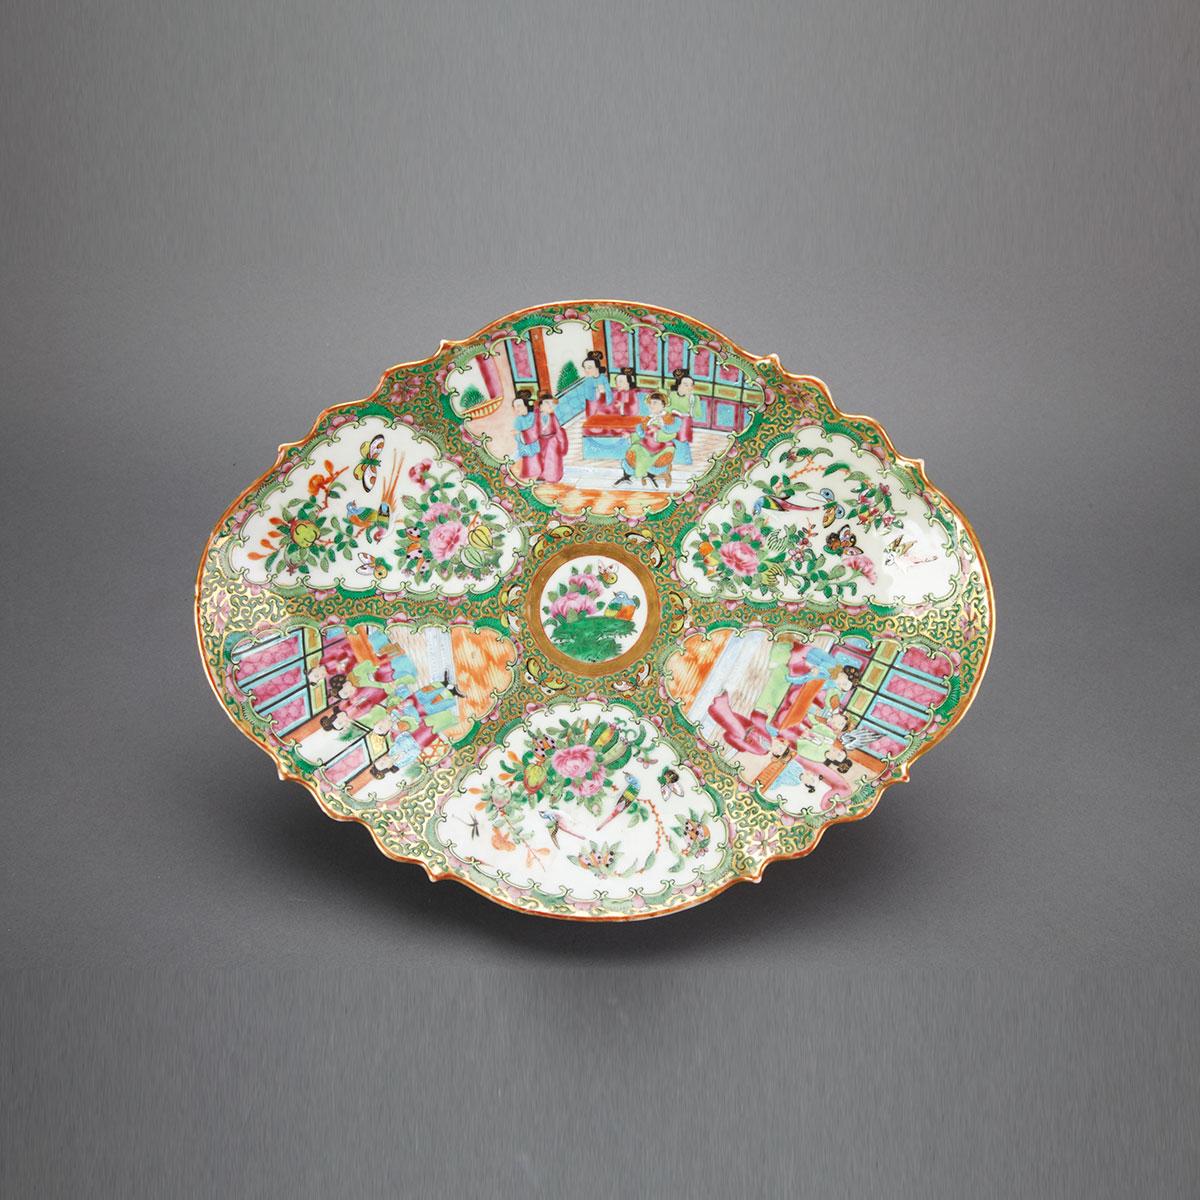 Two Export Famille Rose Wares, 19th Century